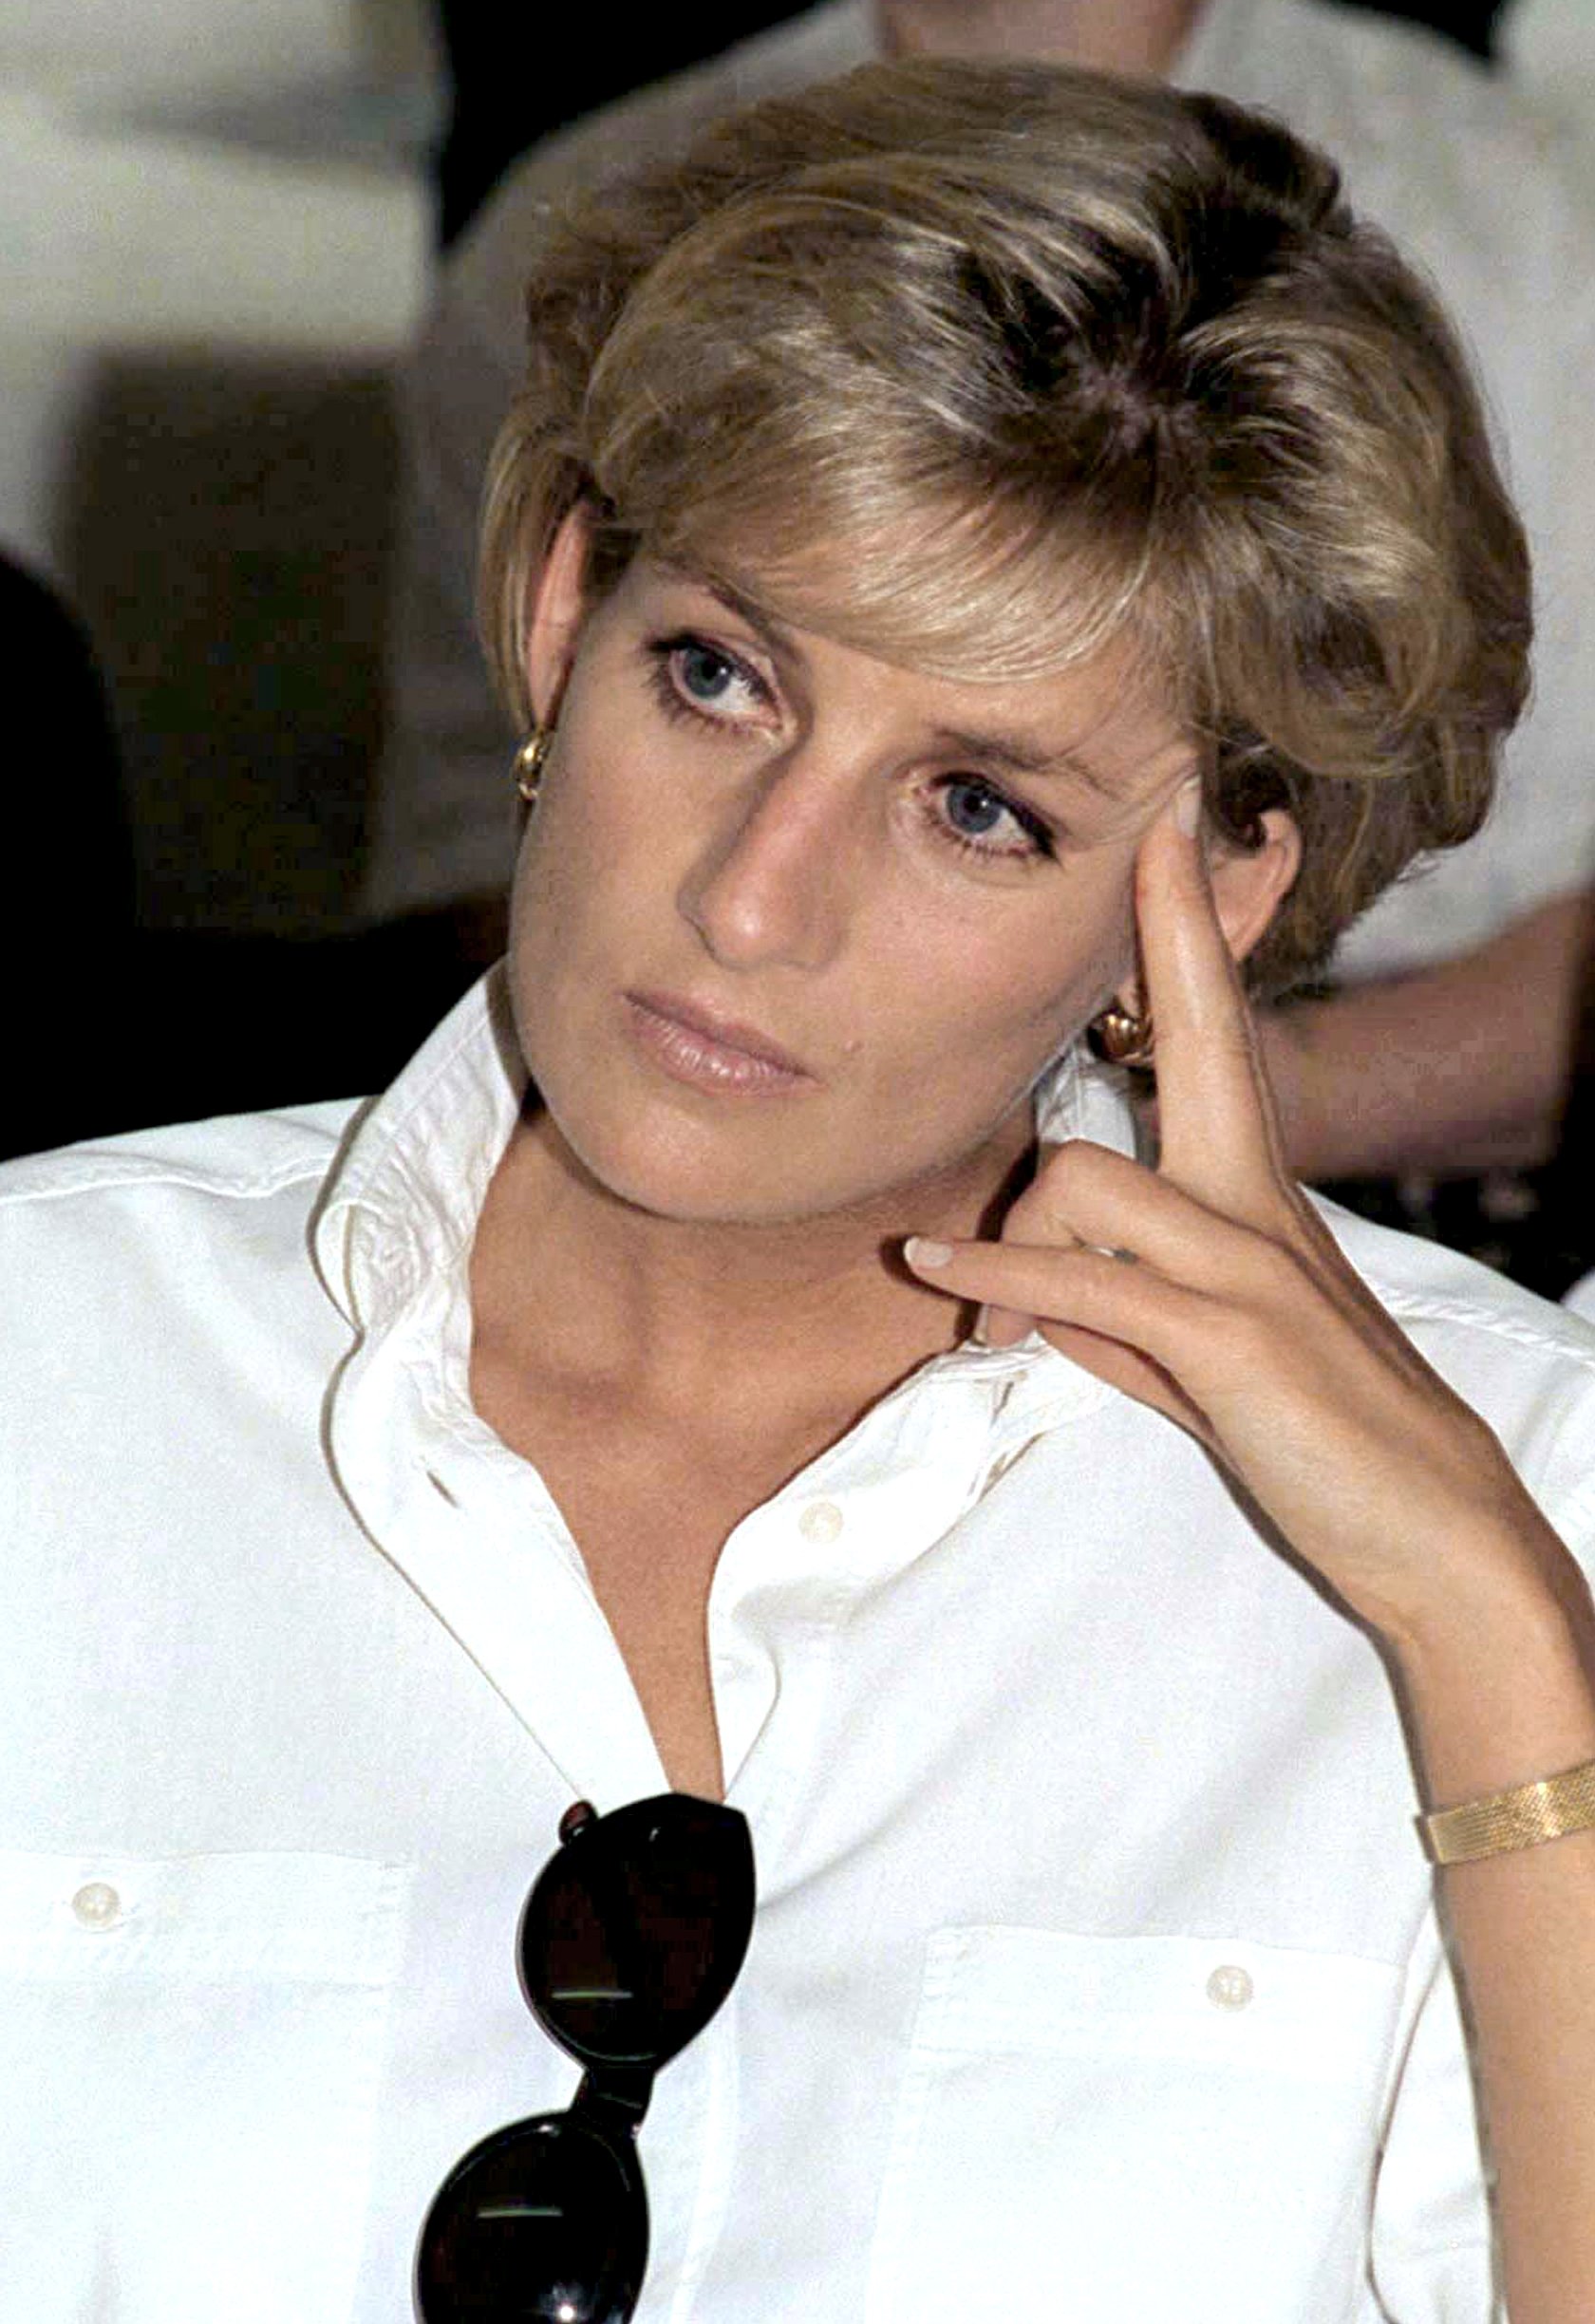 Princess Diana wearing a white collared shirt accessorized with sunglasses in Angola